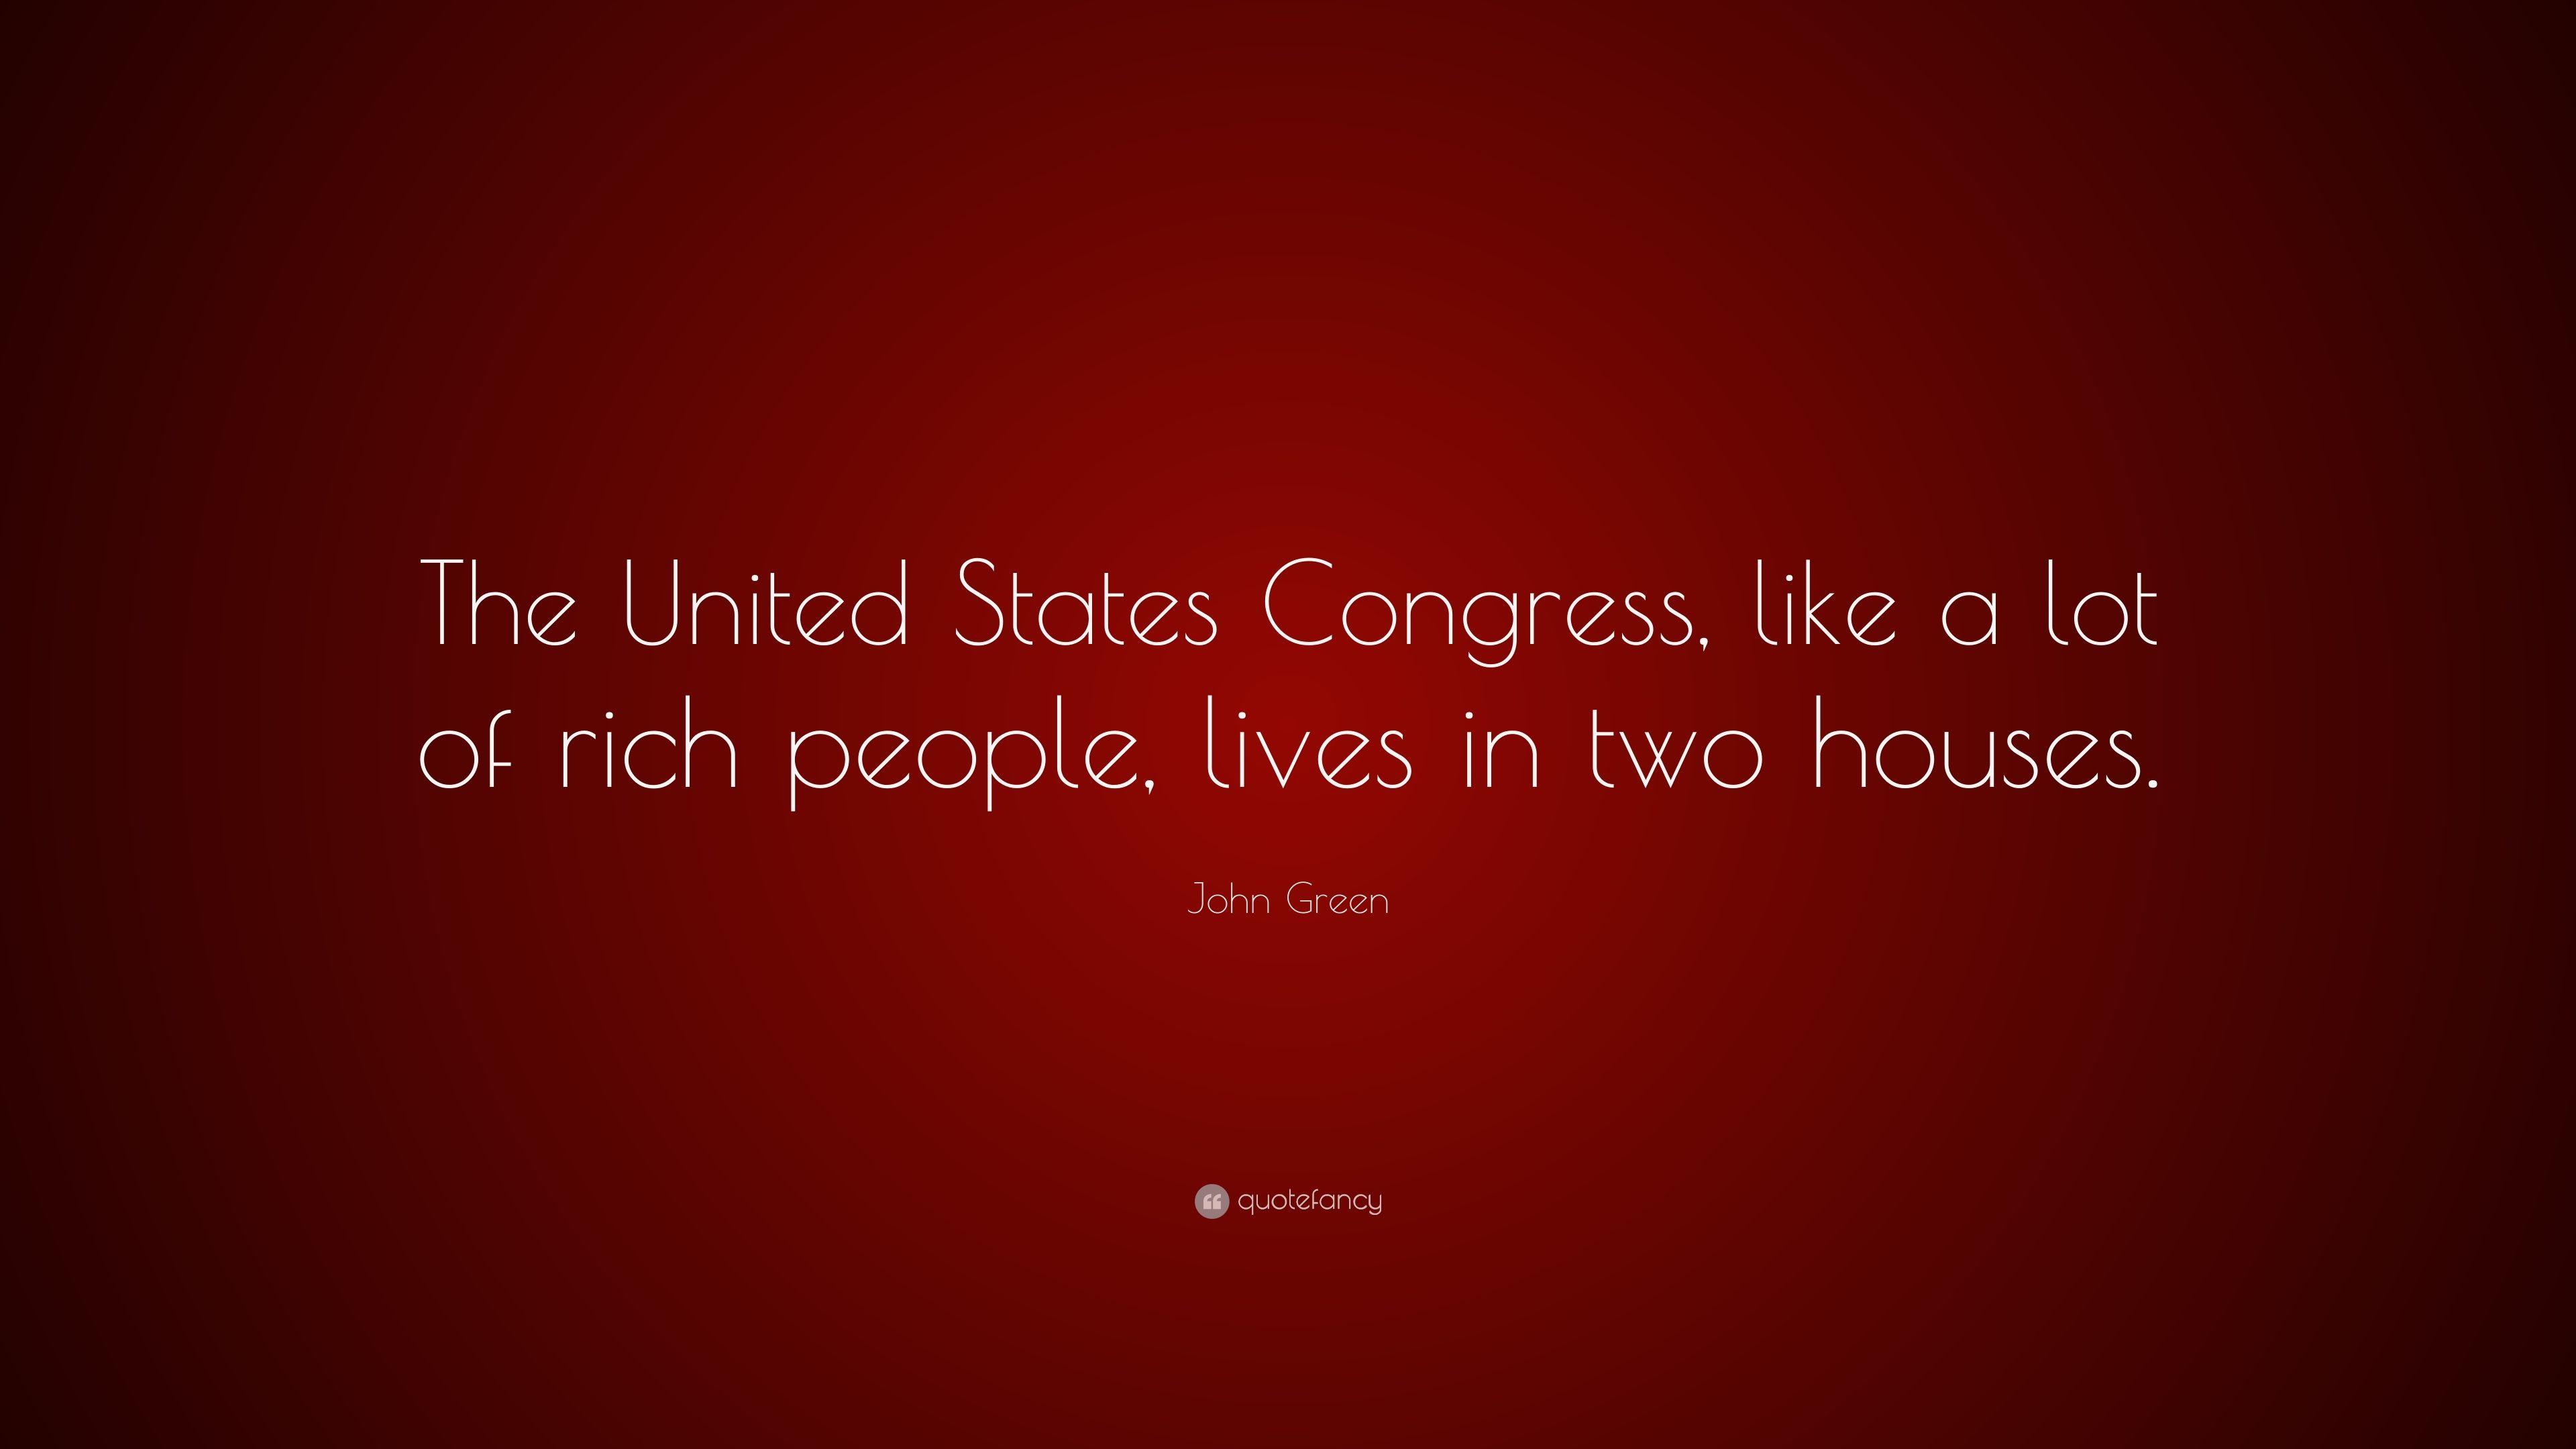 John Green Quote: “The United States Congress, like a lot of rich